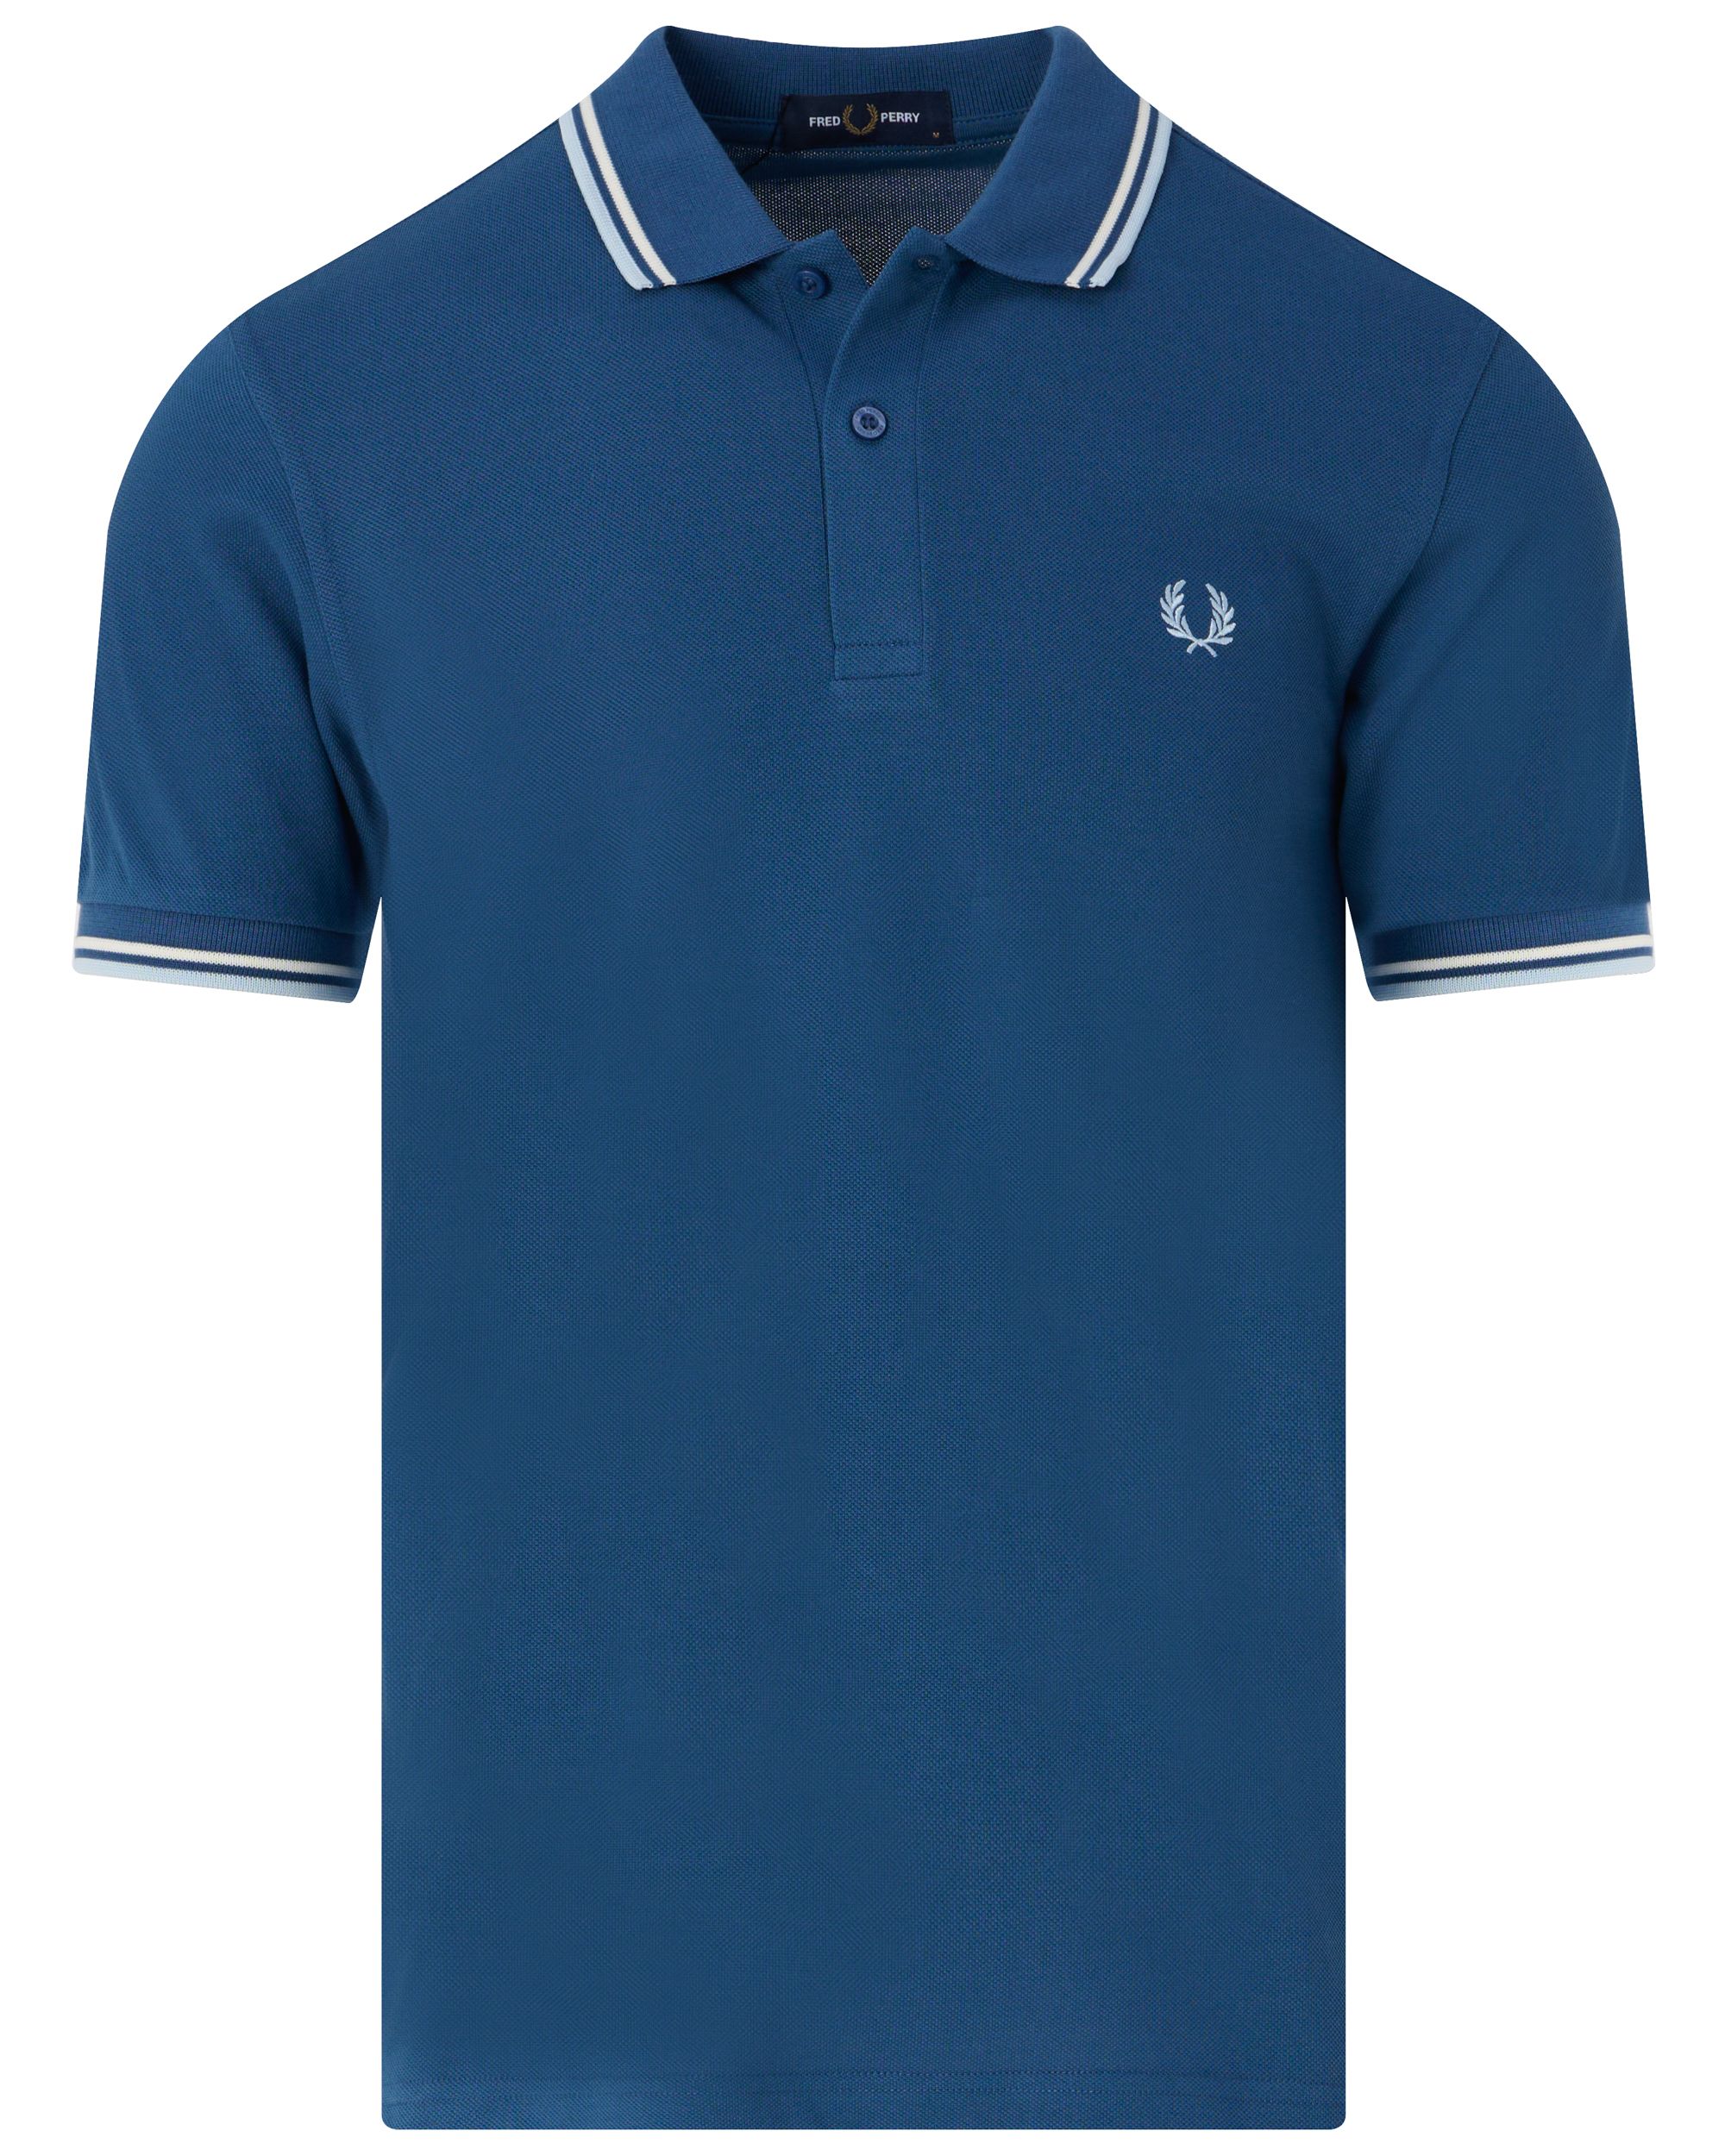 Fred Perry Polo KM Donker blauw 091953-001-XL